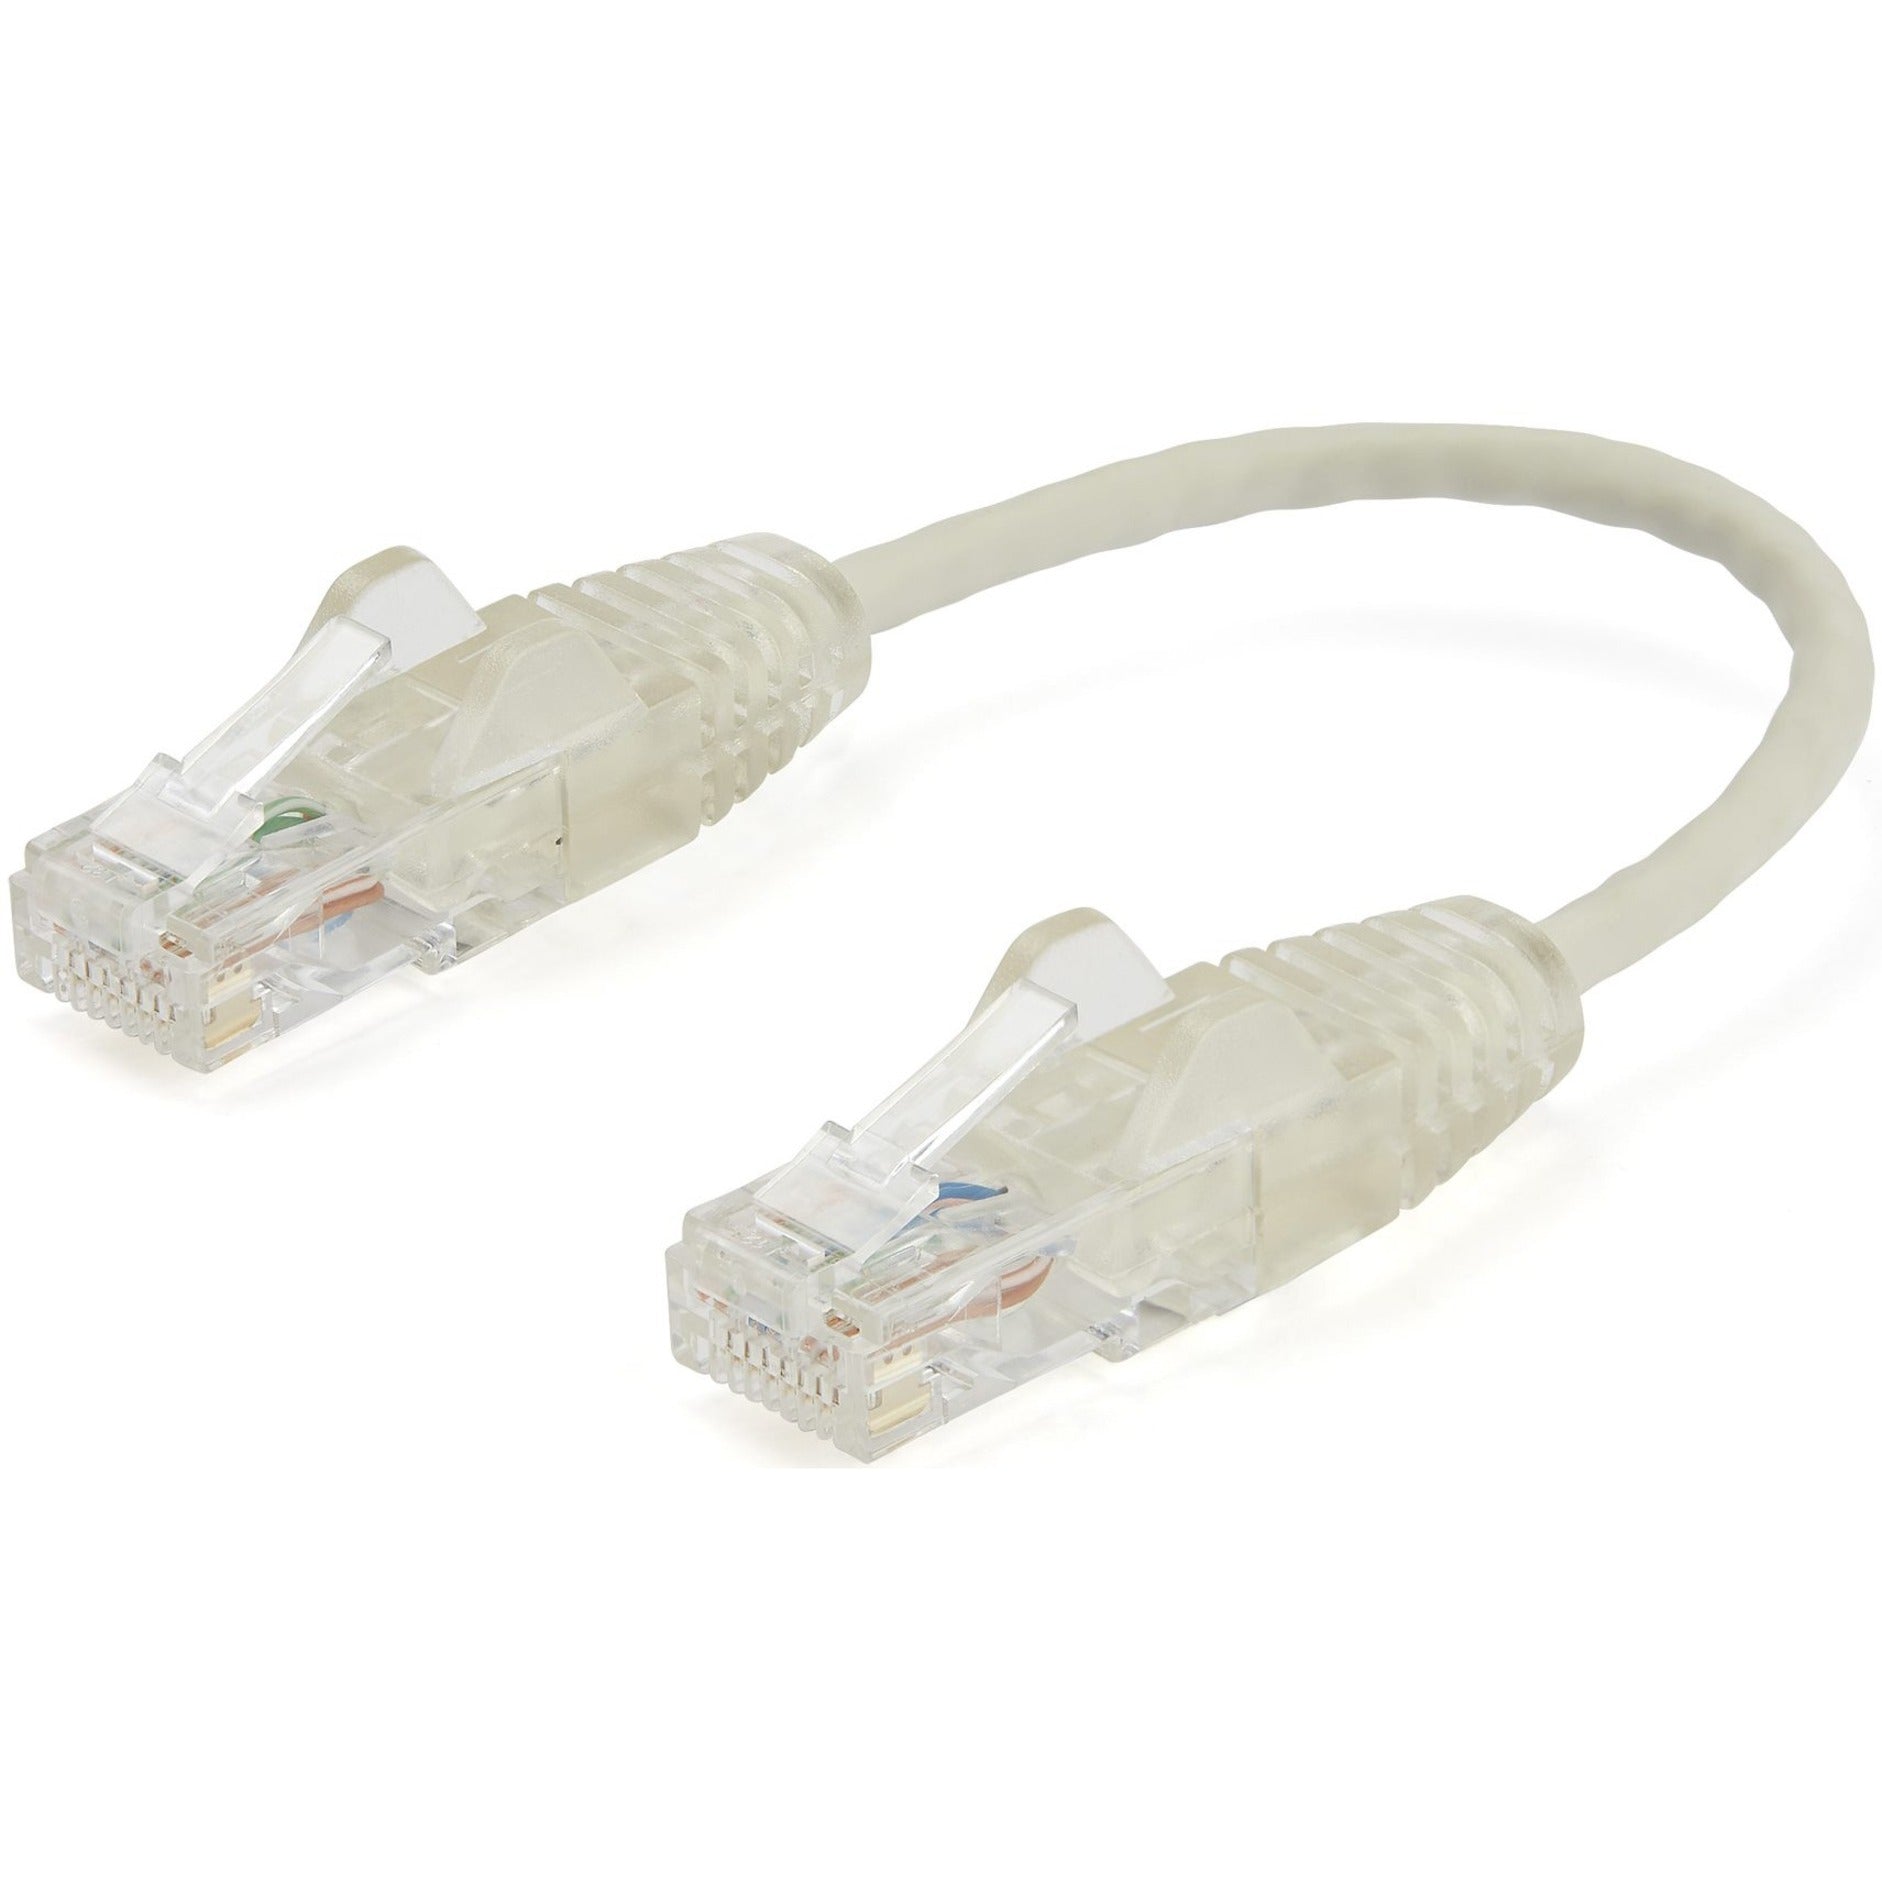 StarTech.com N6PAT6INGRS Cat.6 Patch Network Cable, 6 in Gray - Slim, Snagless RJ45 Connectors, Cat6 Cable, Cat6 Patch Cable, Cat6 Network Cable